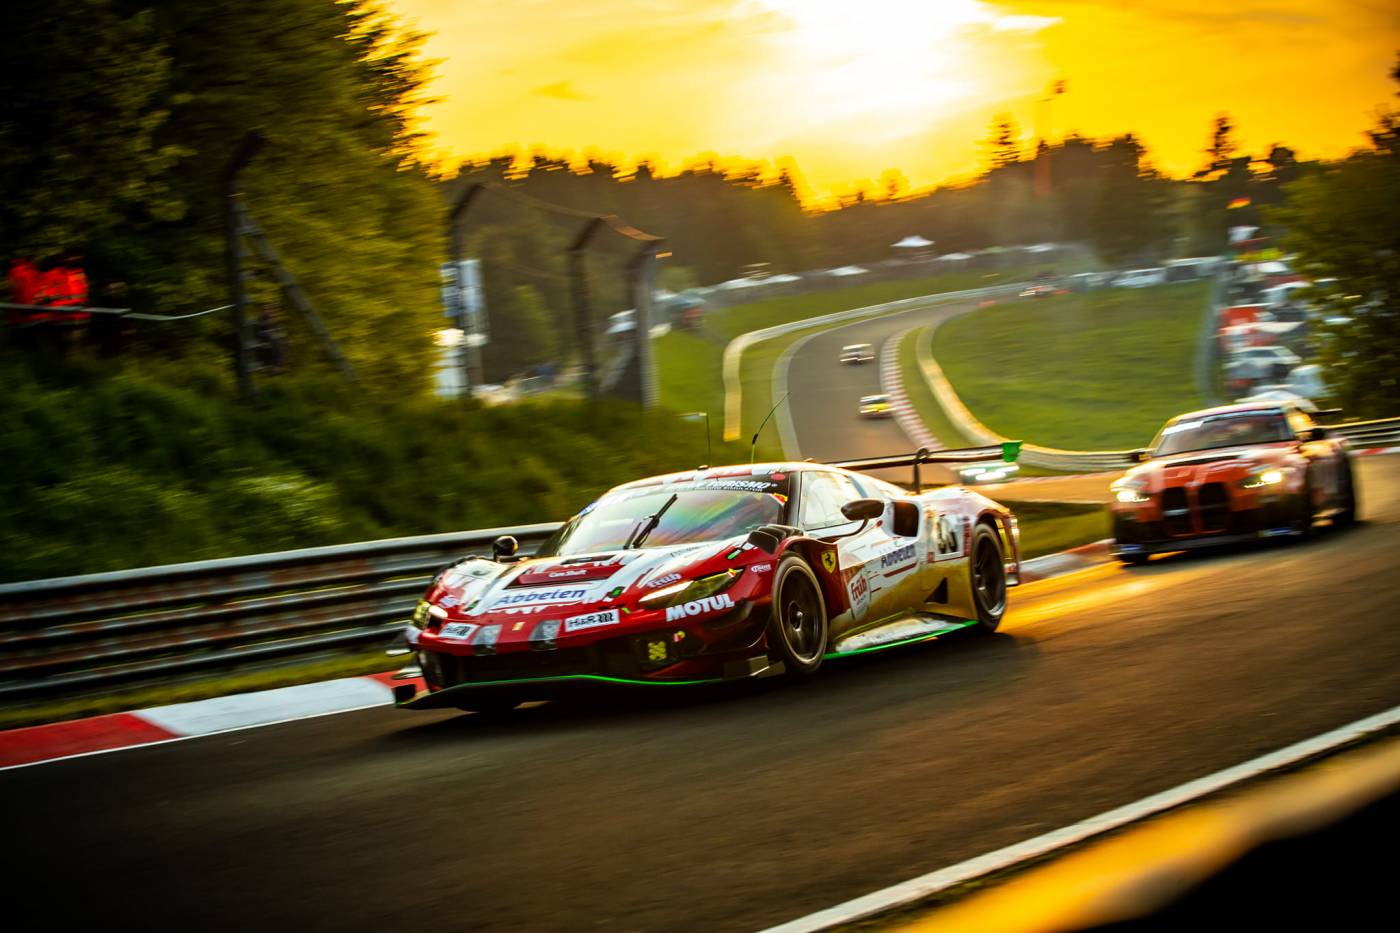 The Ferrari 296 GT3 triumphs at the 24 Hours of Nürburgring